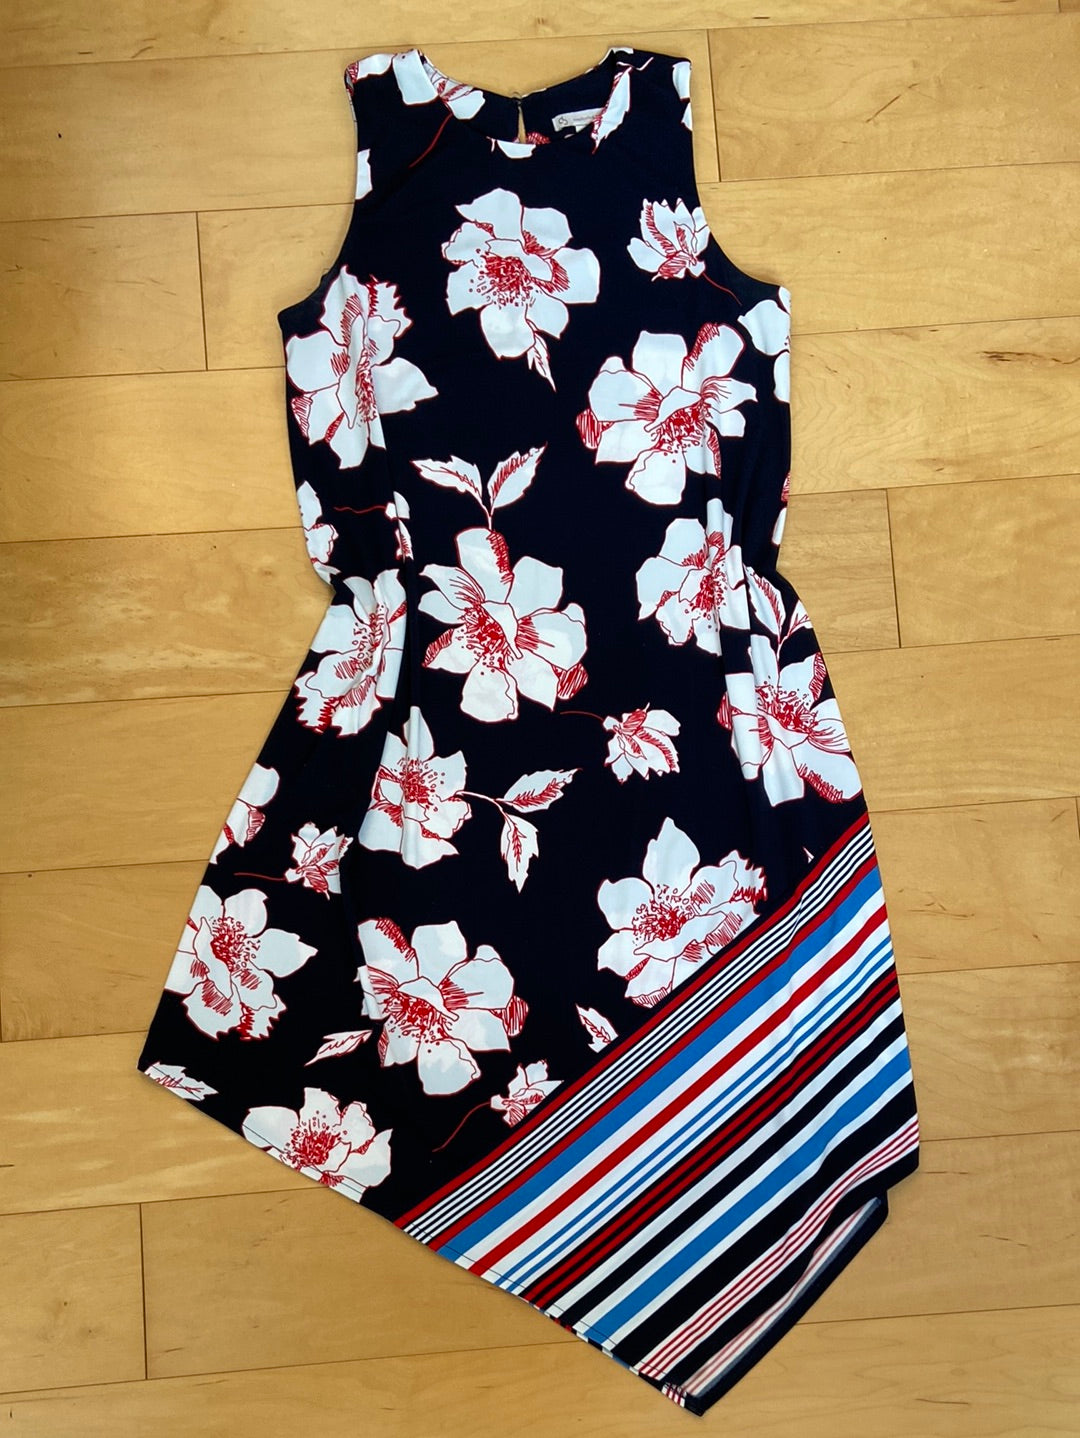 Black dress sleeveless asymmetrical hem with stripes on the bottom and floral print on top white flowers with red trim stripes are blue red and white